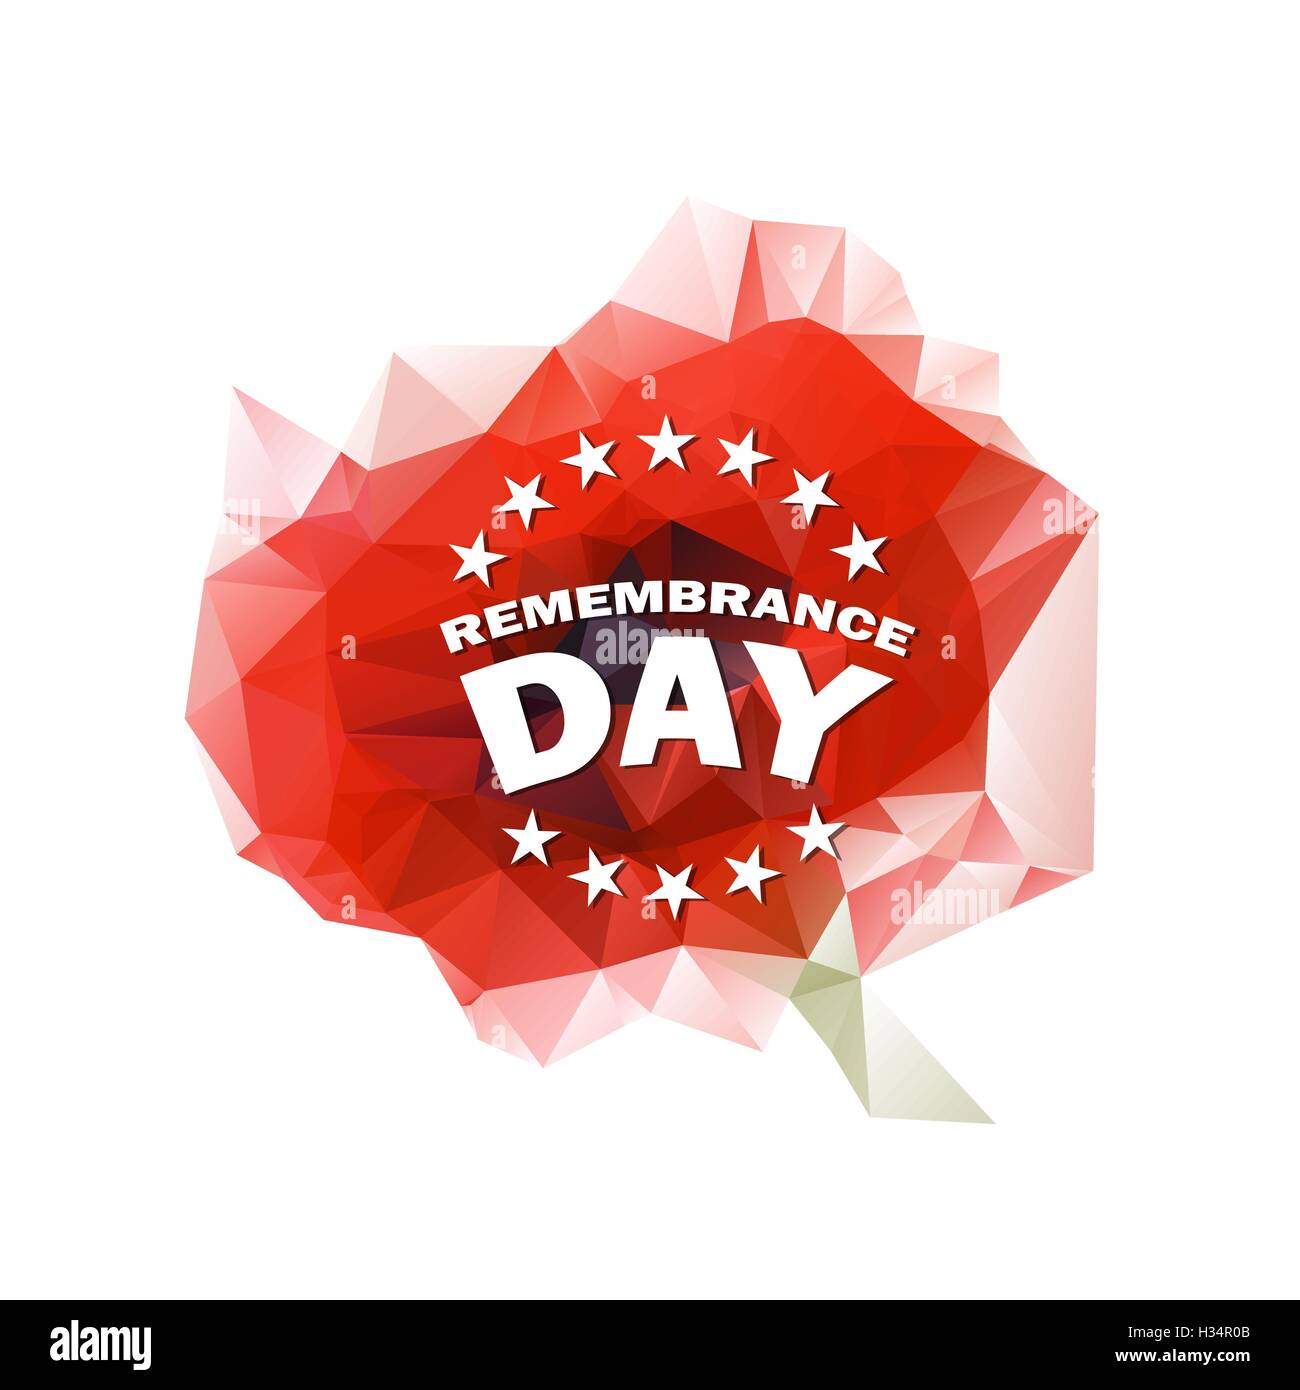 low polygonal red poppy symbol with remembrance day words vector illustration isolated on white Stock Vector